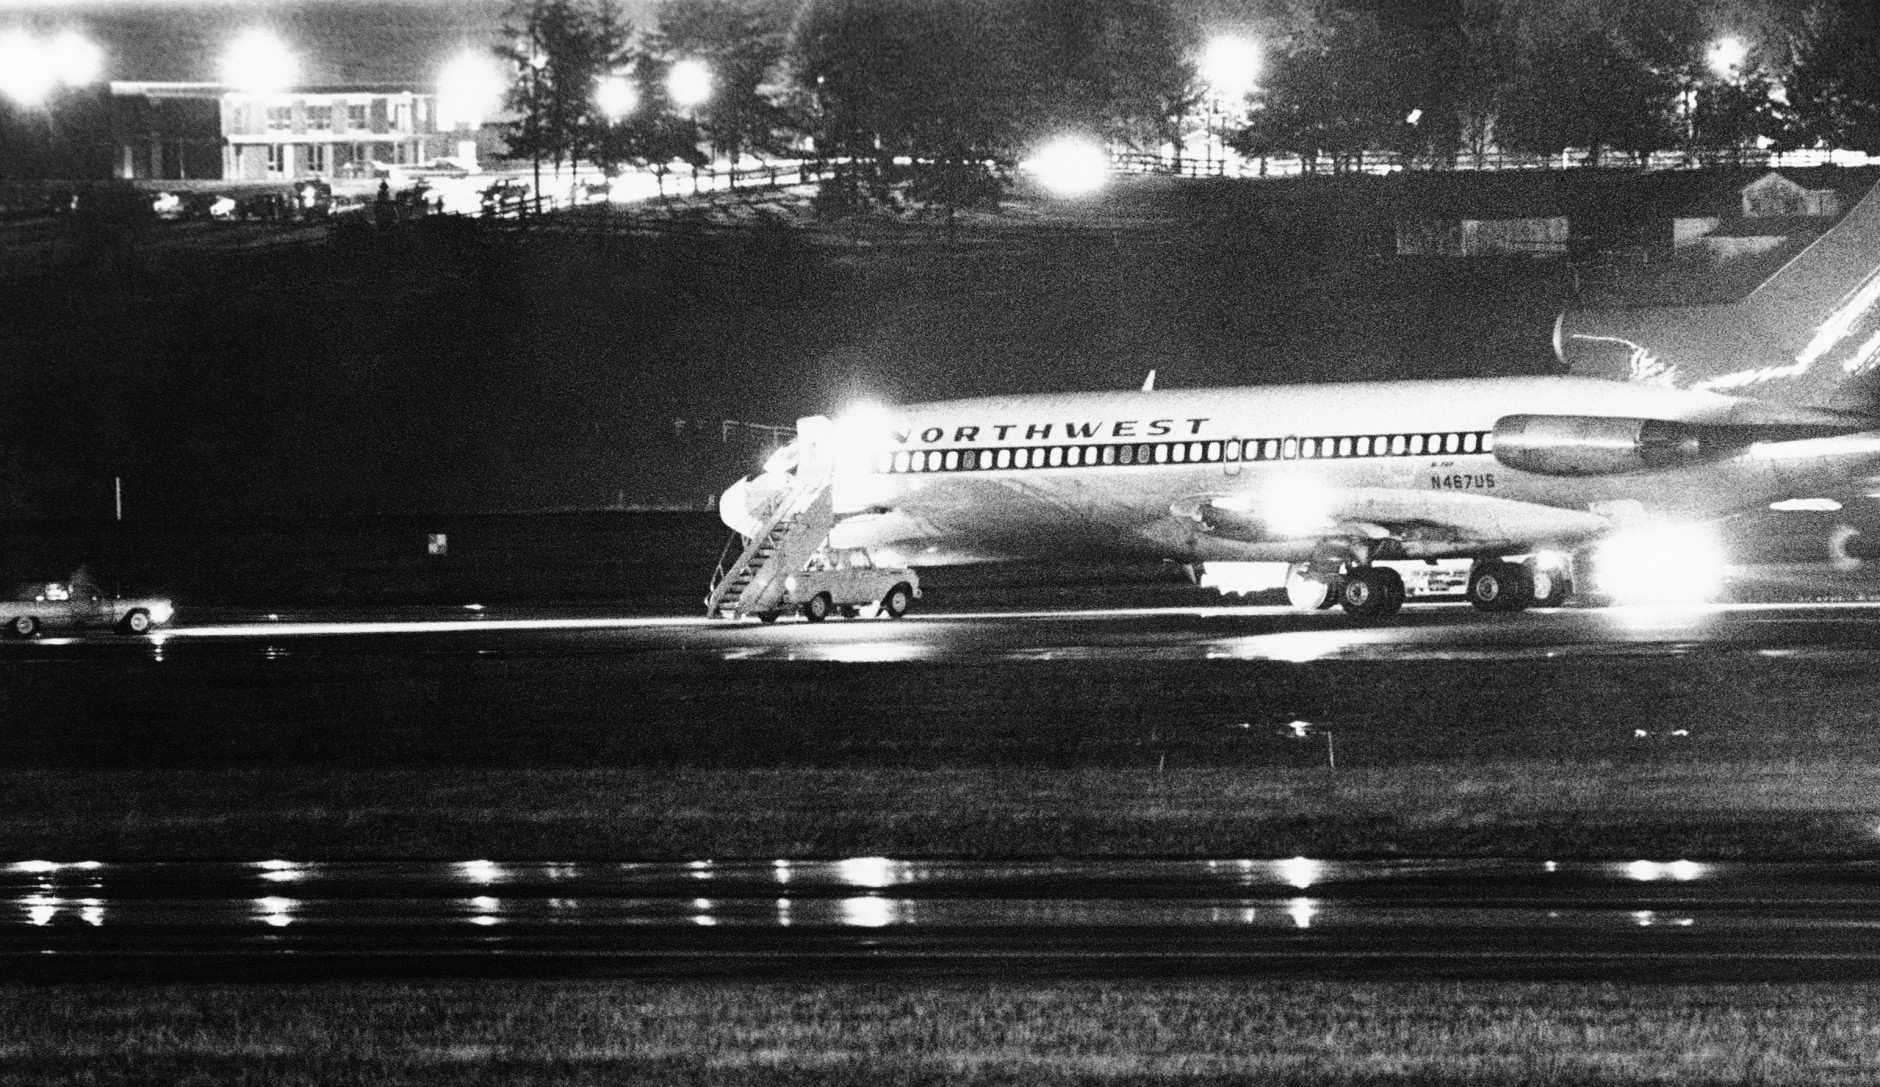 FILE -- A hijacked Northwest Airlines jetliner is seen in this Nov. 25, 1971 file photo as it sits on a runway for refueling at Seattle-Tacoma International Airport, Nov. 25, 1971, Seattle. 2011 has been a rich year for students of D.B. Cooper, the mysterious skyjacker who vanished out the back of the Boeing 727 wearing a business suit, a parachute and a pack with $200,000 in ransom money 40 years ago Thursday. (AP Photo, File)